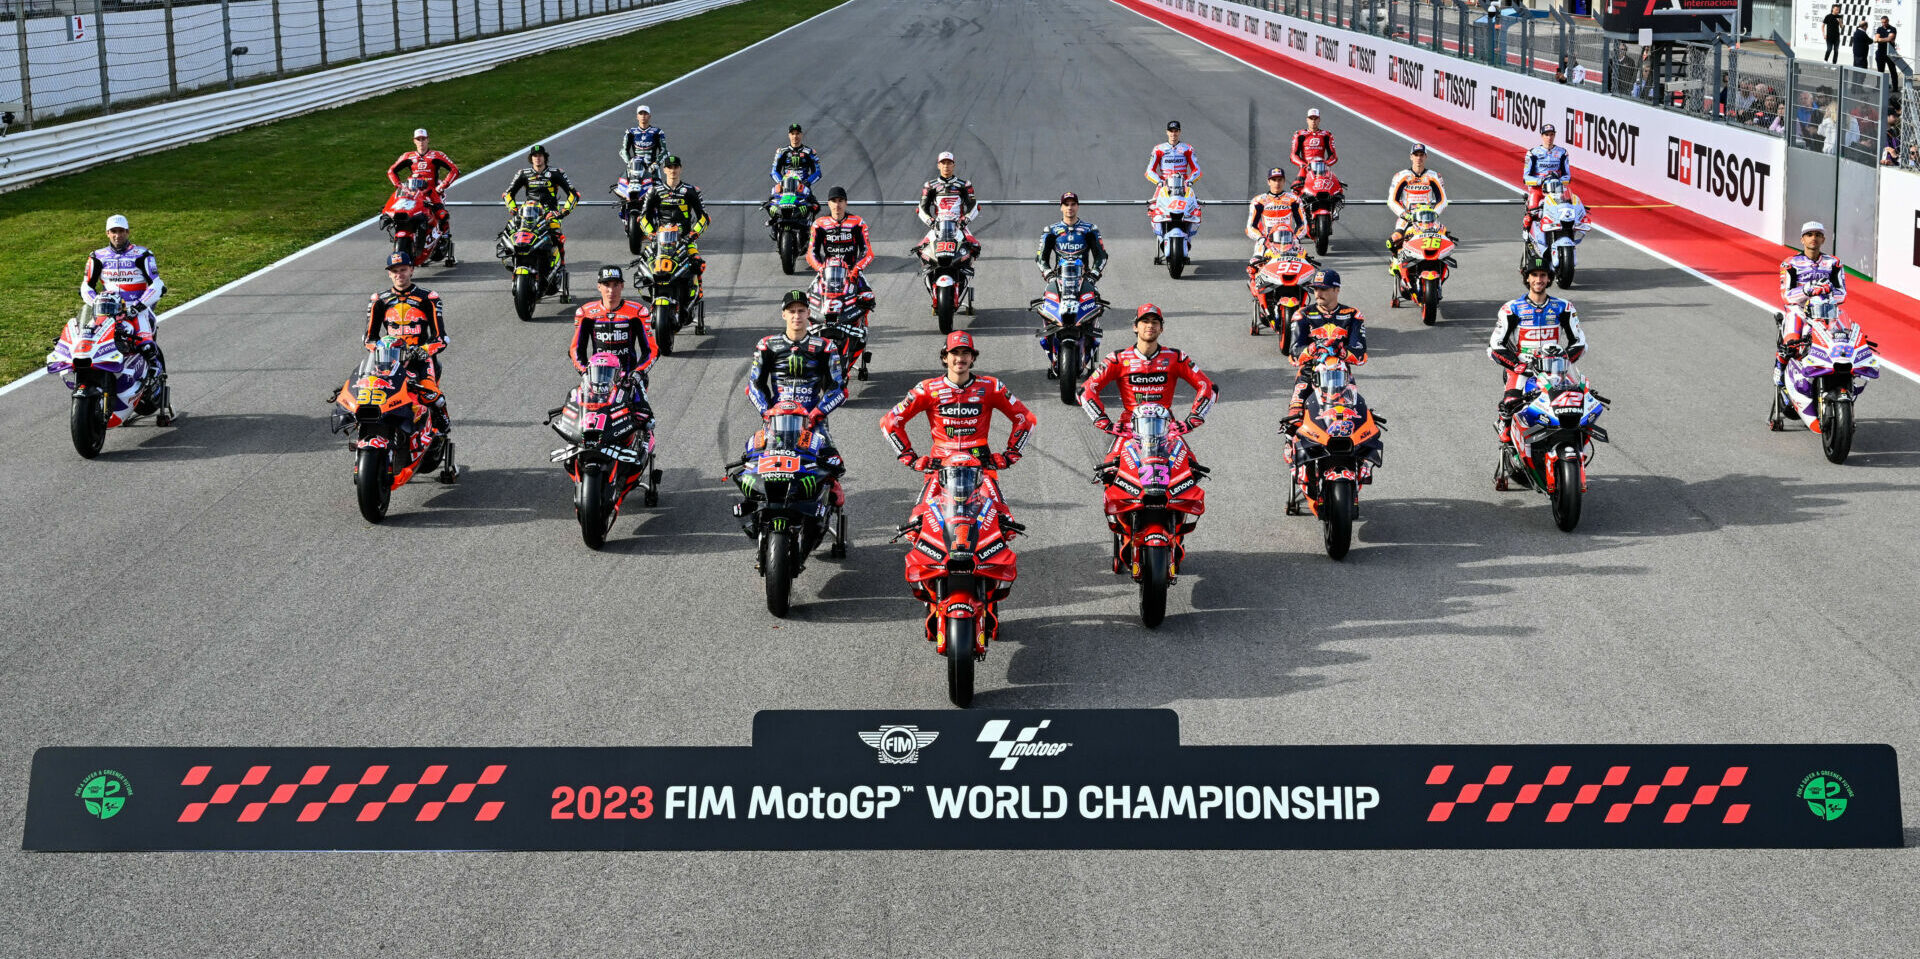 The 2023 MotoGP field arranged in order of their finish in the 2022 MotoGP World Championship. Photo courtesy Dorna.